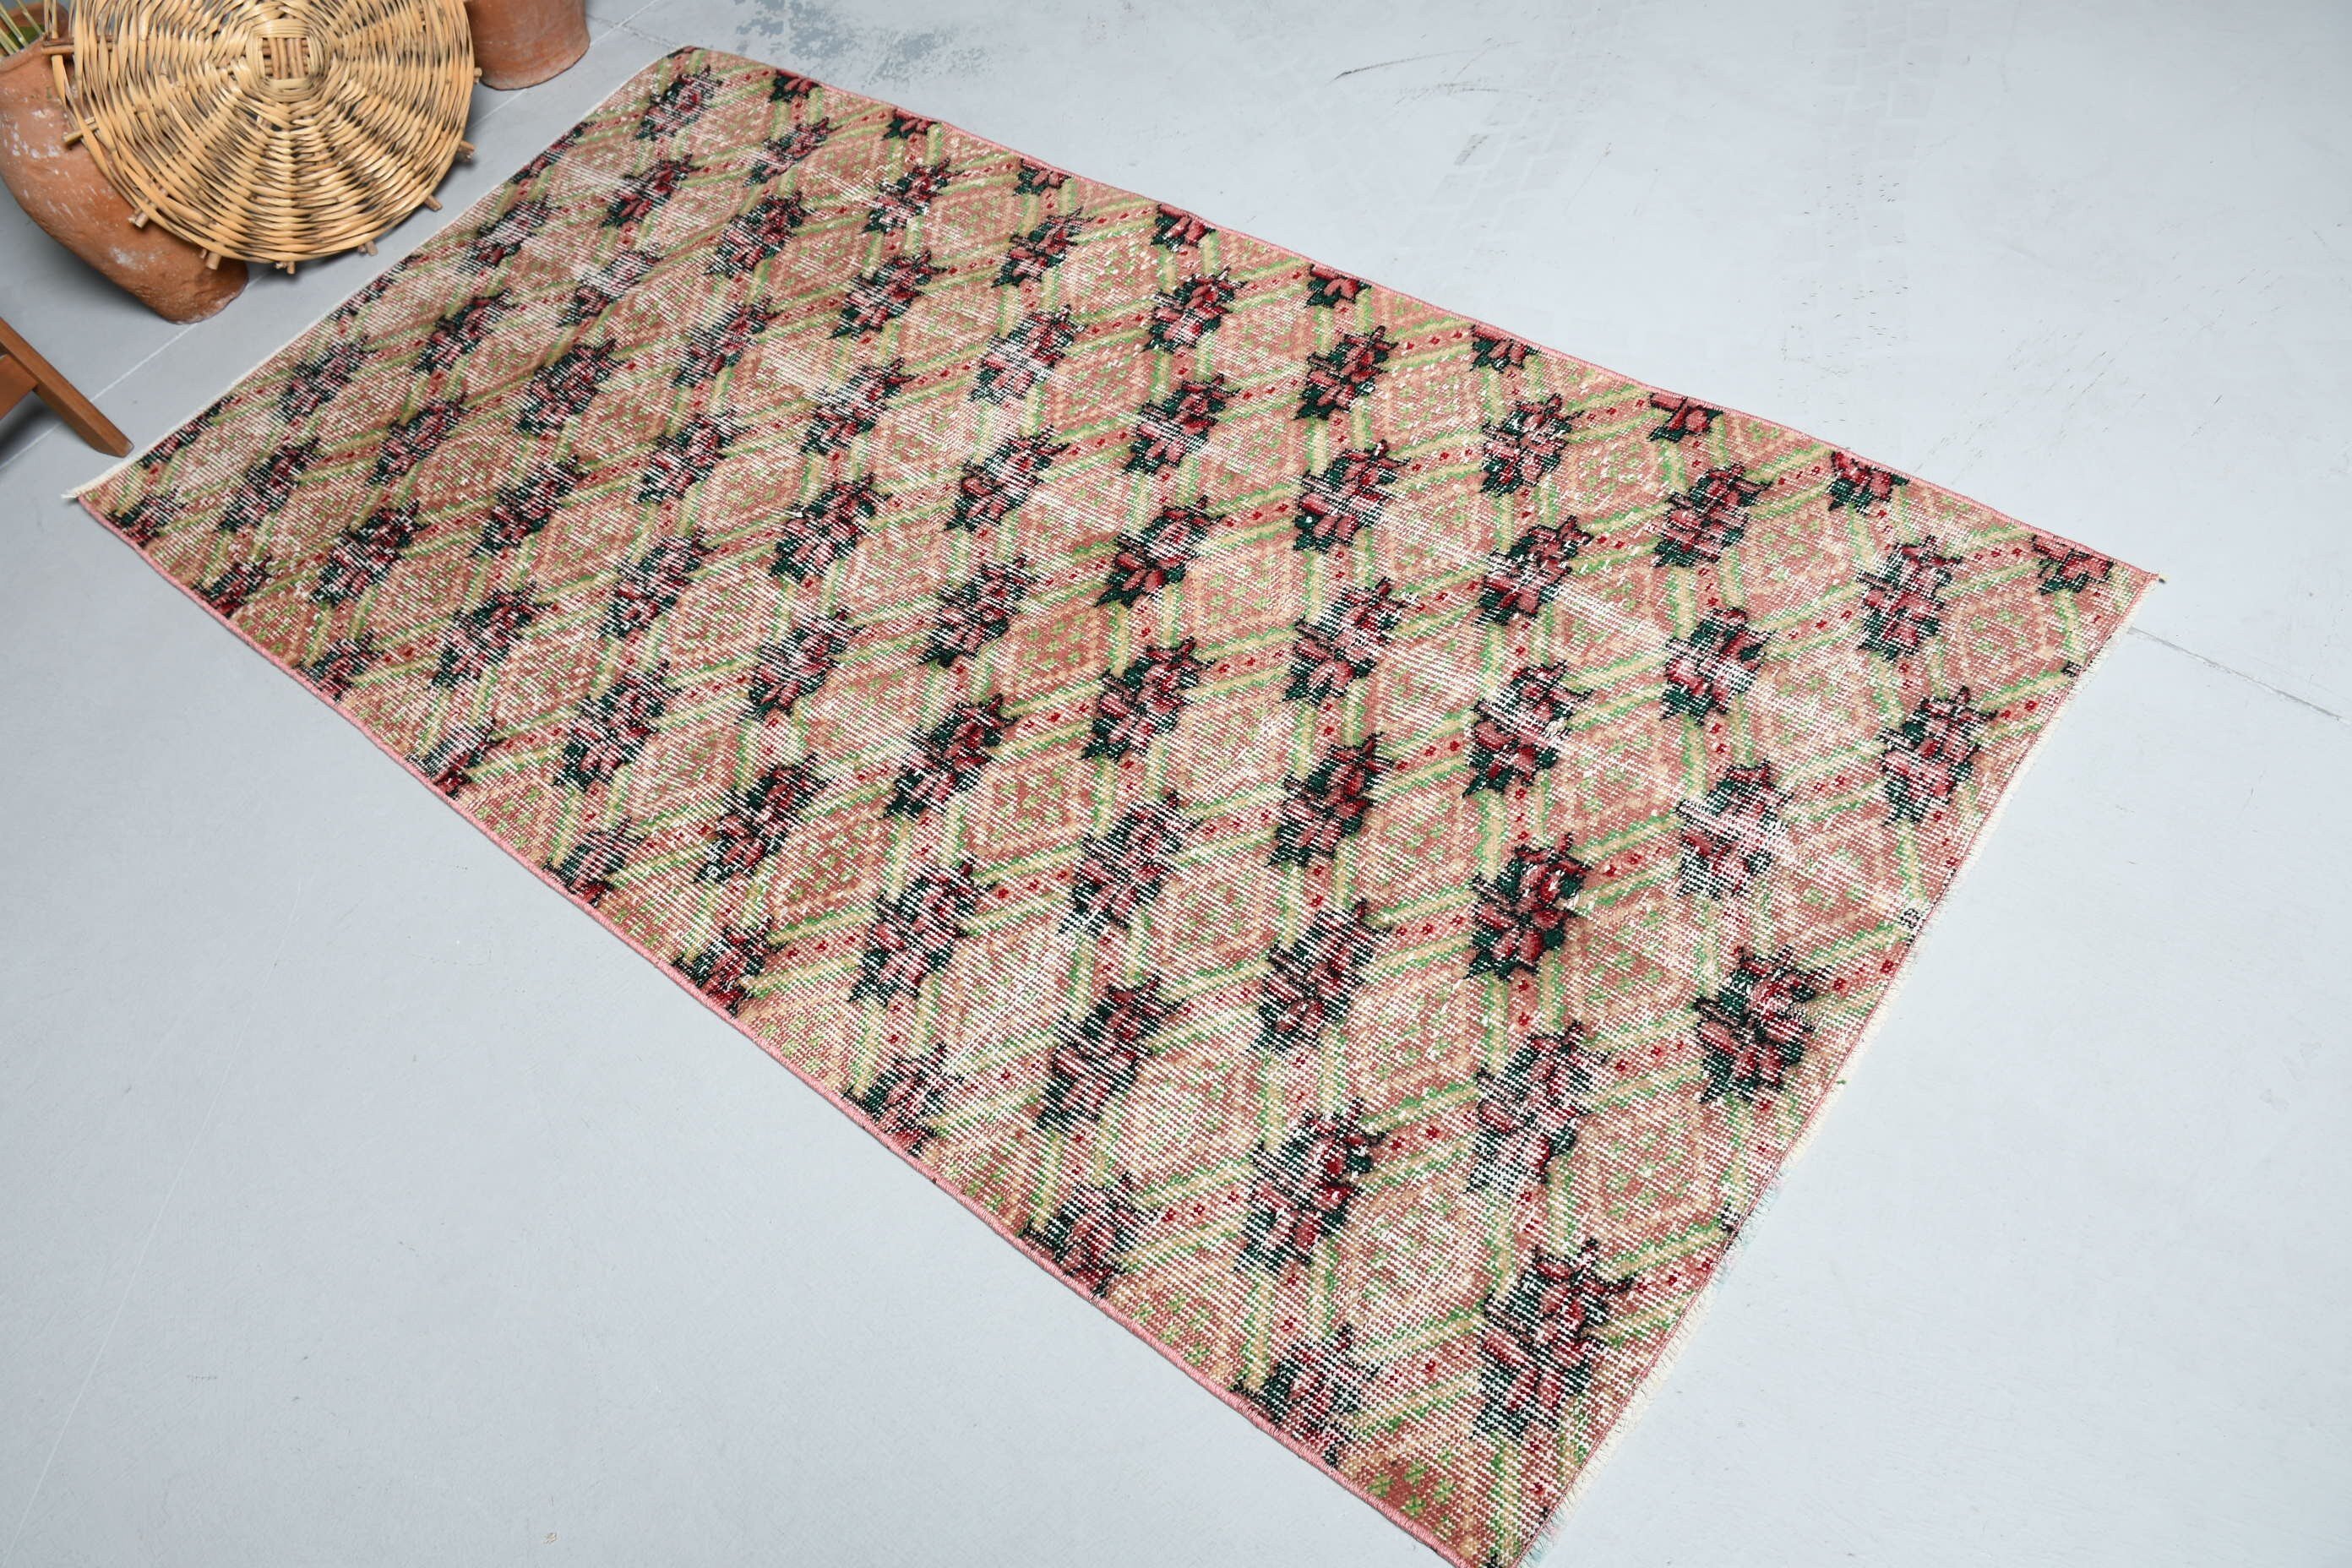 Turkish Rug, Home Decor Rug, Floor Rug, 3.2x6.2 ft Accent Rug, Entry Rugs, Pink Moroccan Rug, Kitchen Rugs, Vintage Rug, Rugs for Entry